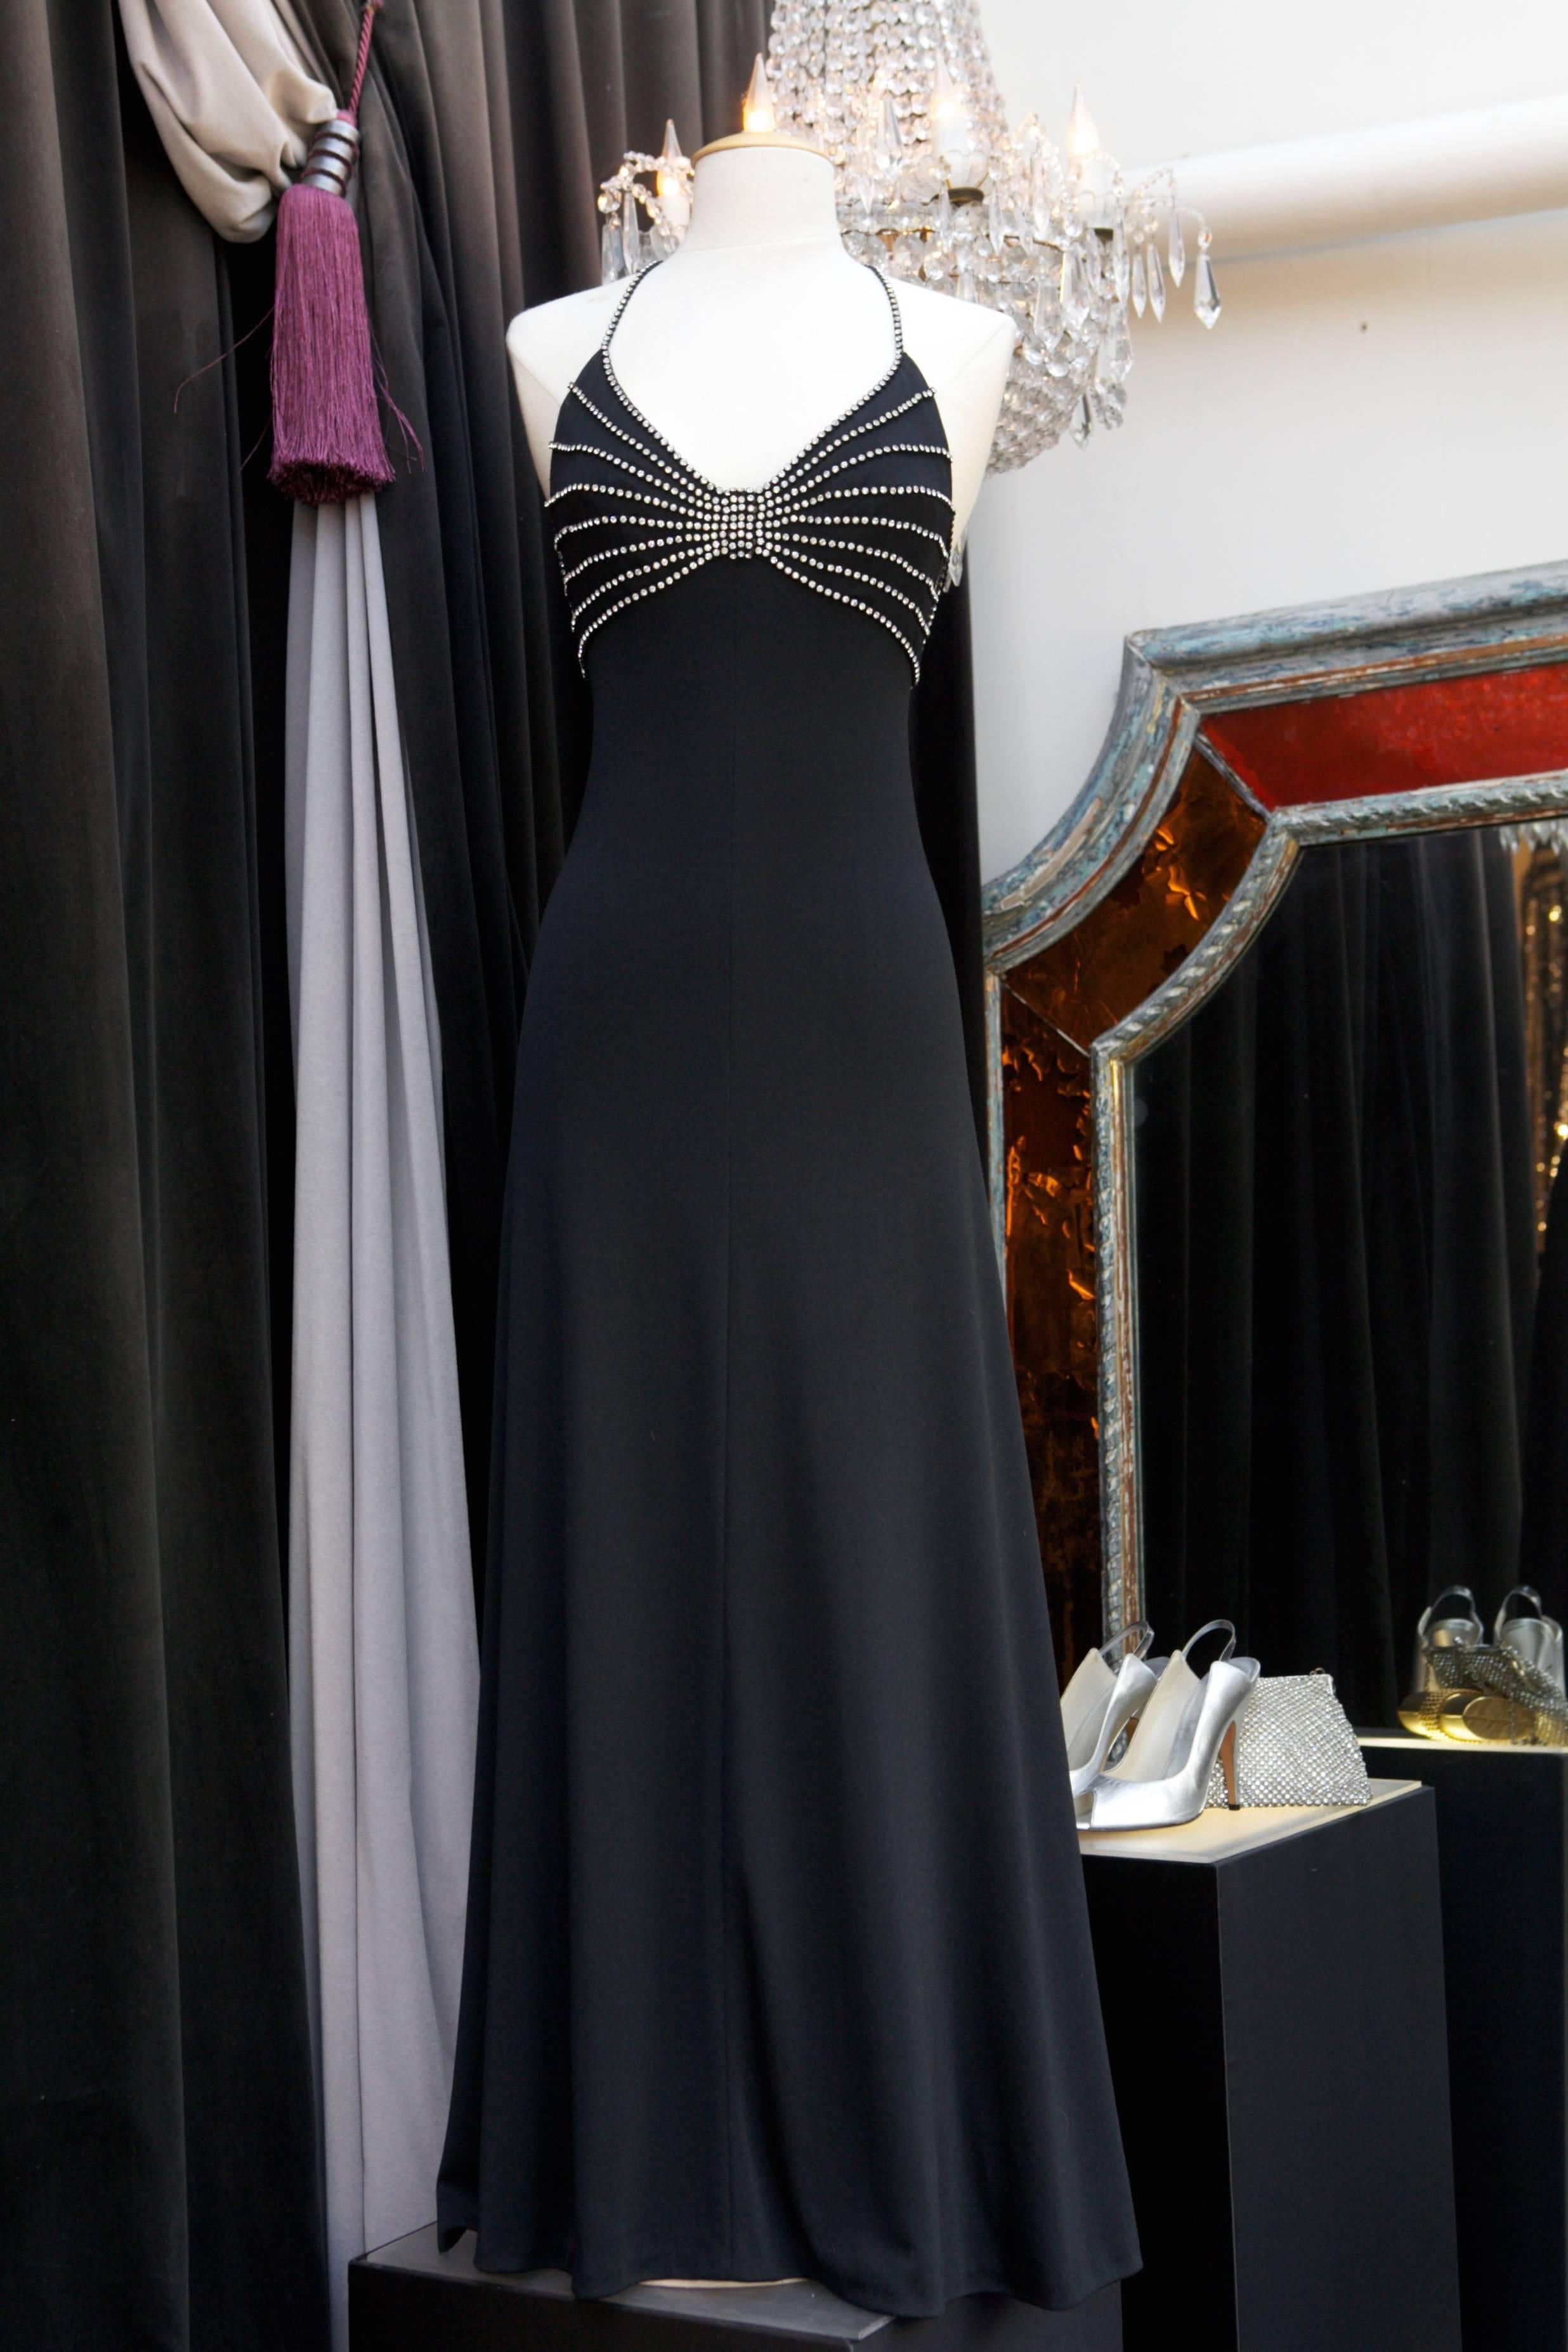 LORIS AZZARO (Made in France) Long and sexy evening gown composed of black jersey adorned with straps and galloons of white crystals on the chest, going all the way at the rear and finish in a flower. 

The dress neckline is very cut out in the